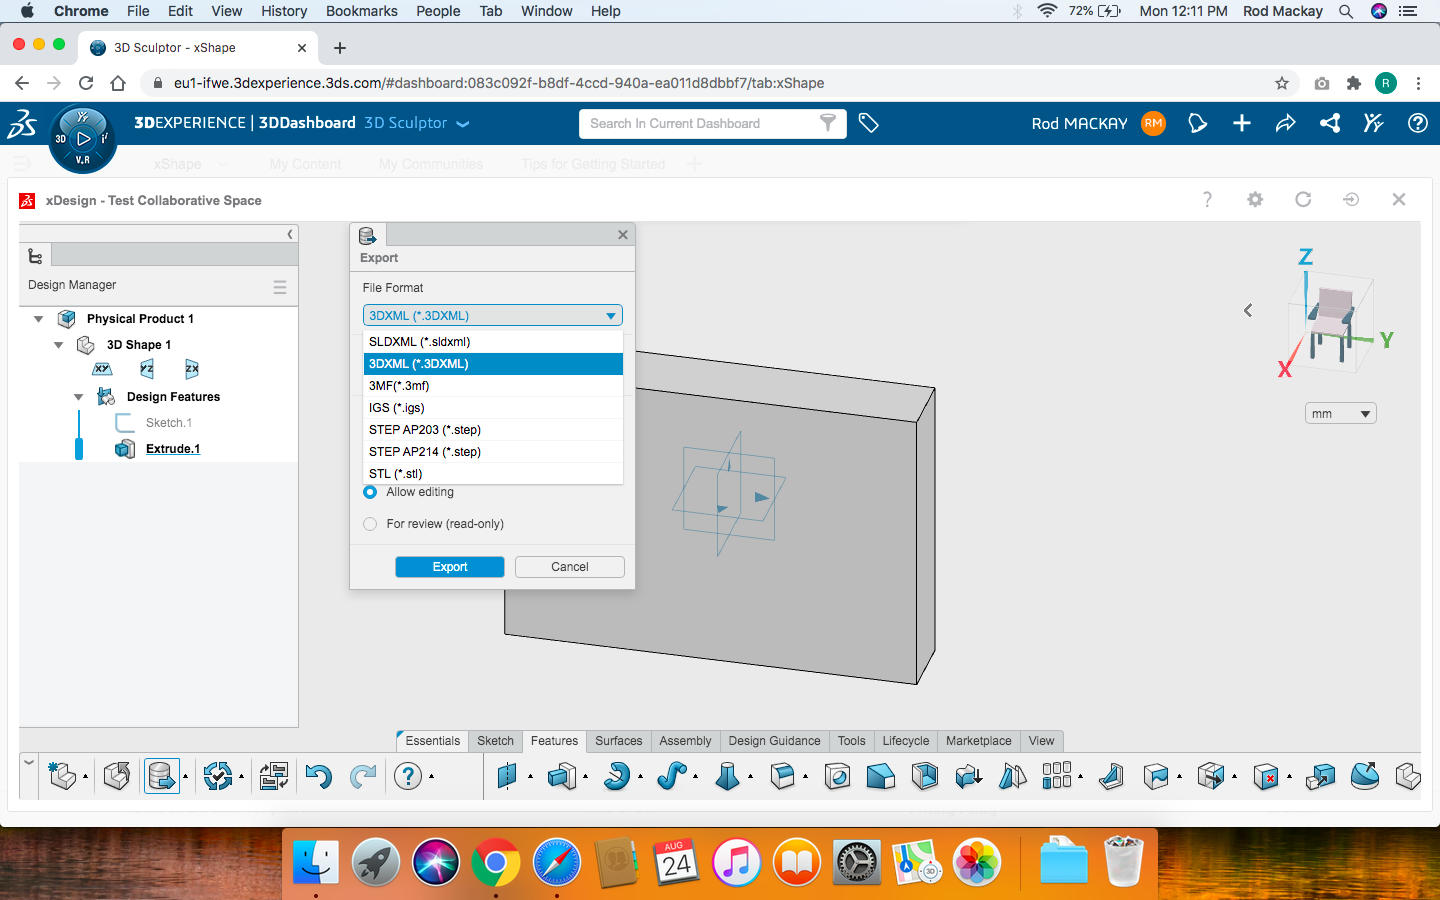 solidworks for mac free download